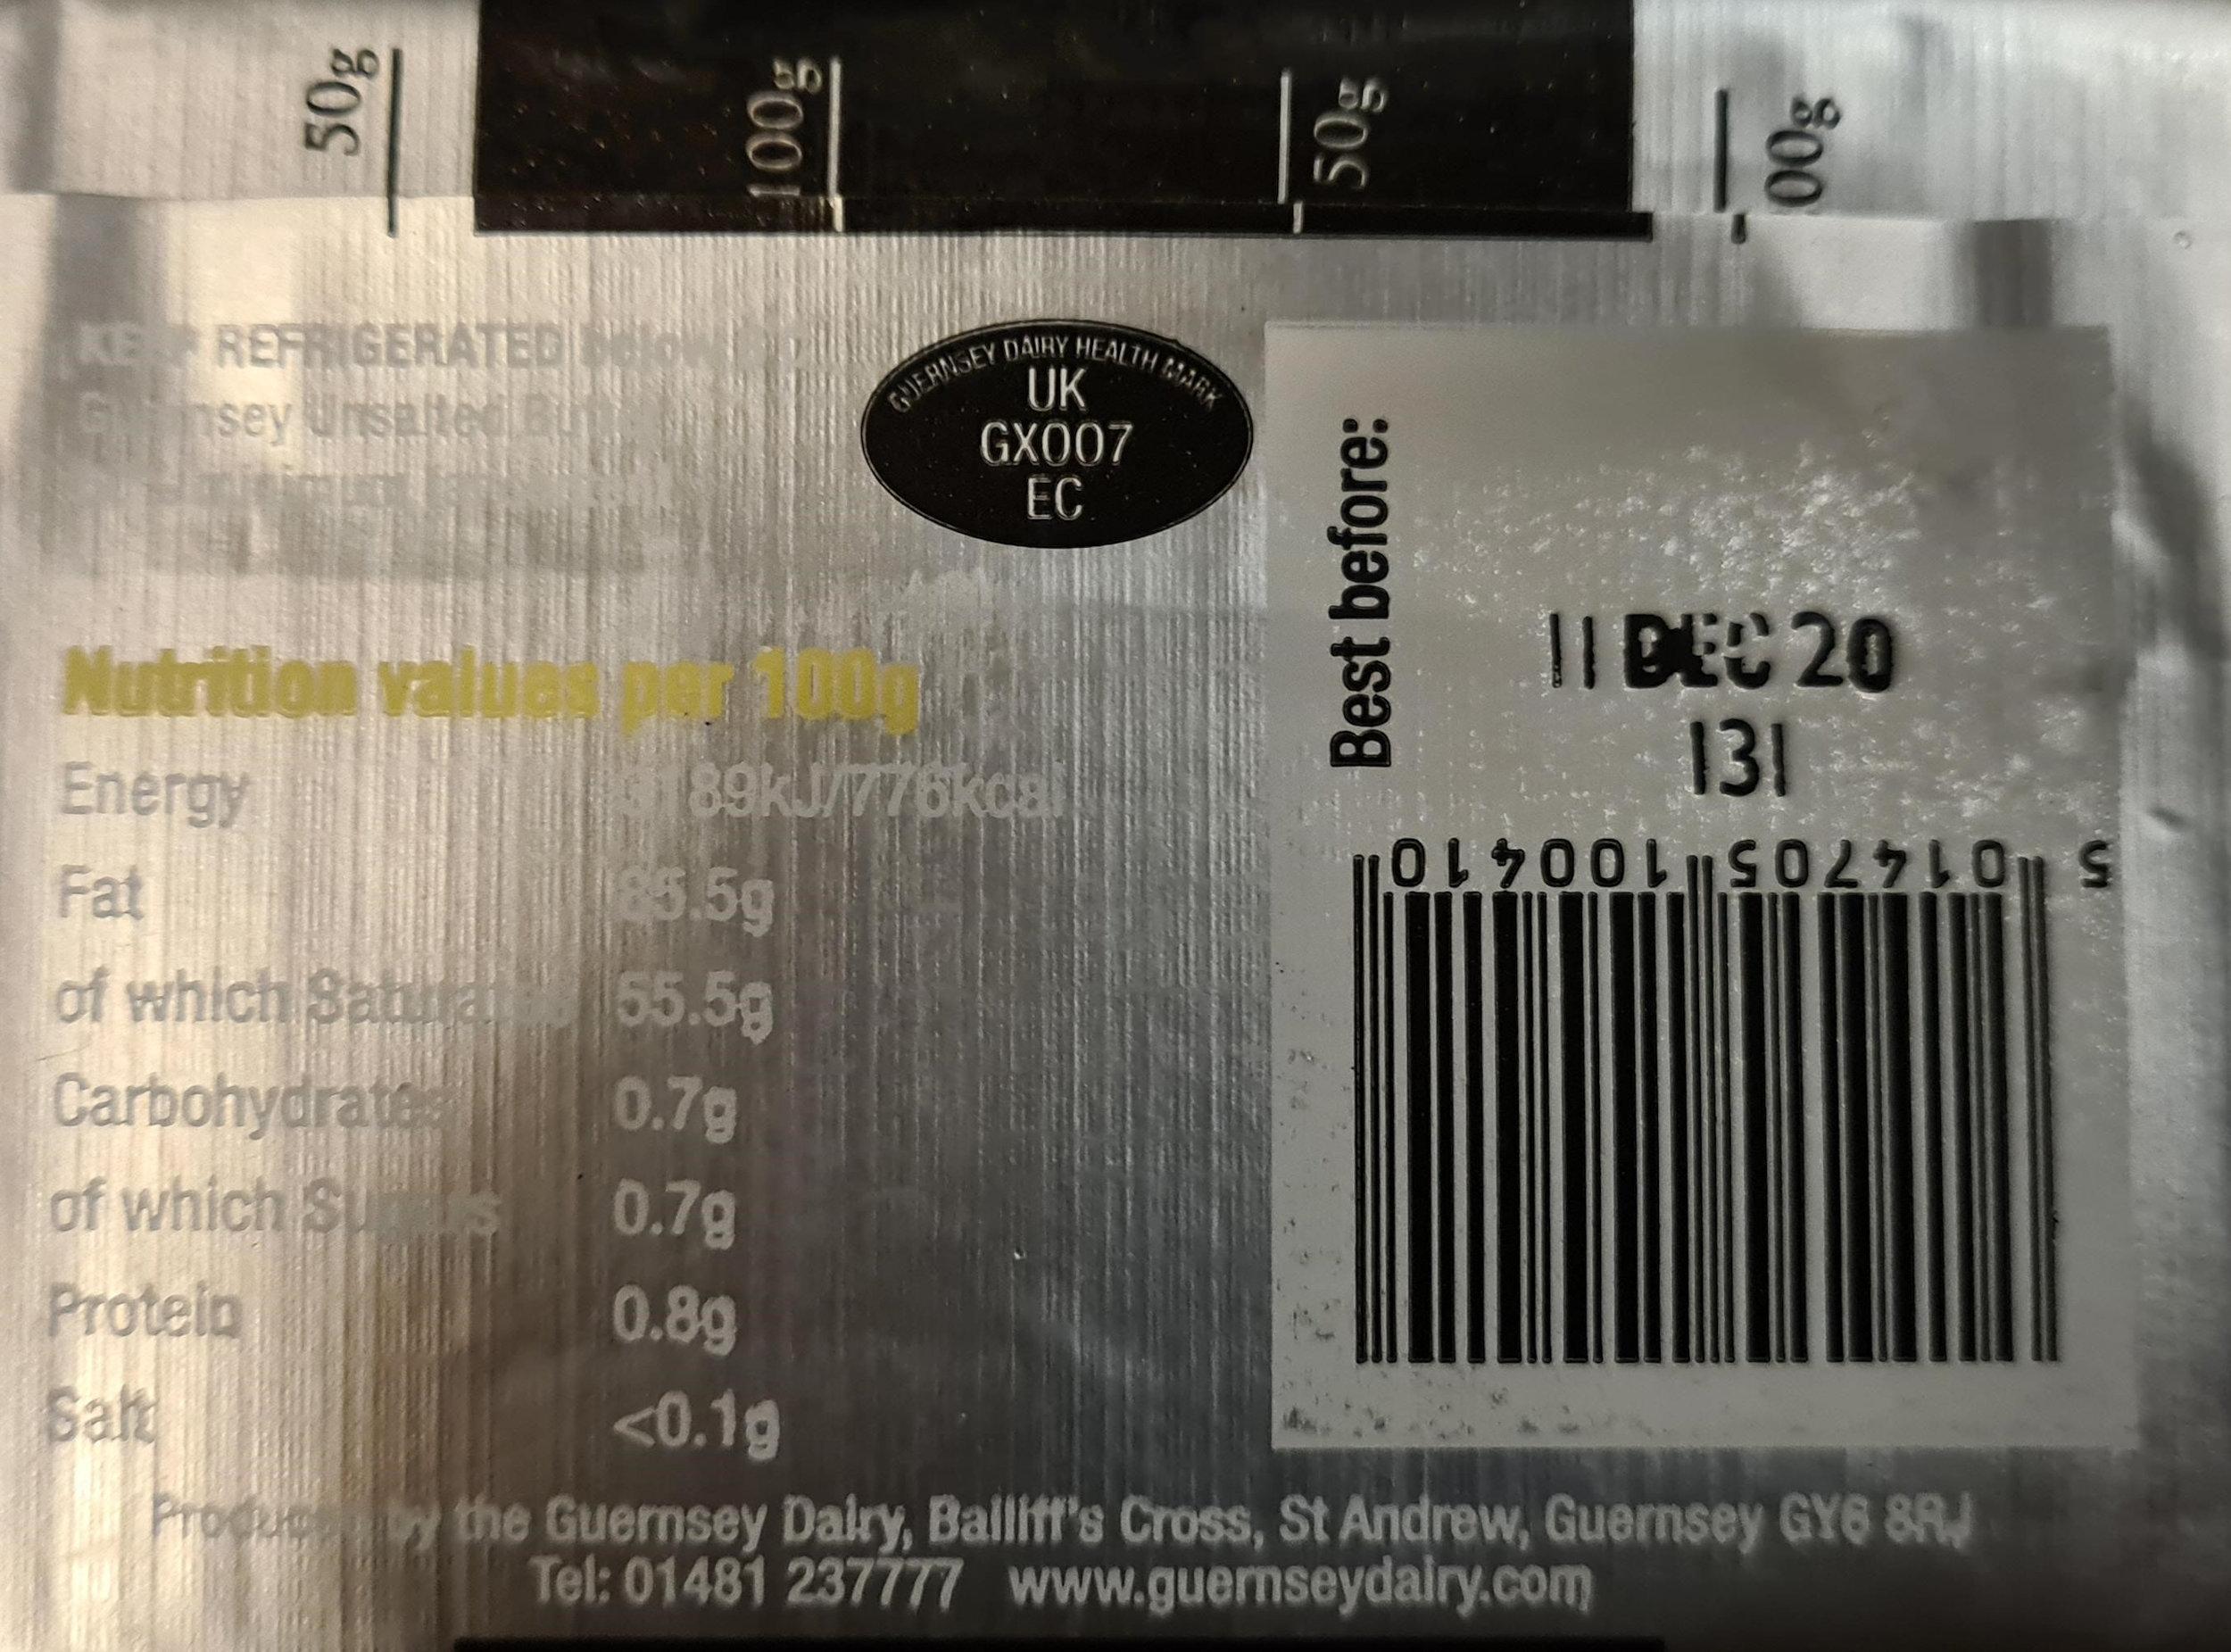 Unsalted butter recall back of packet